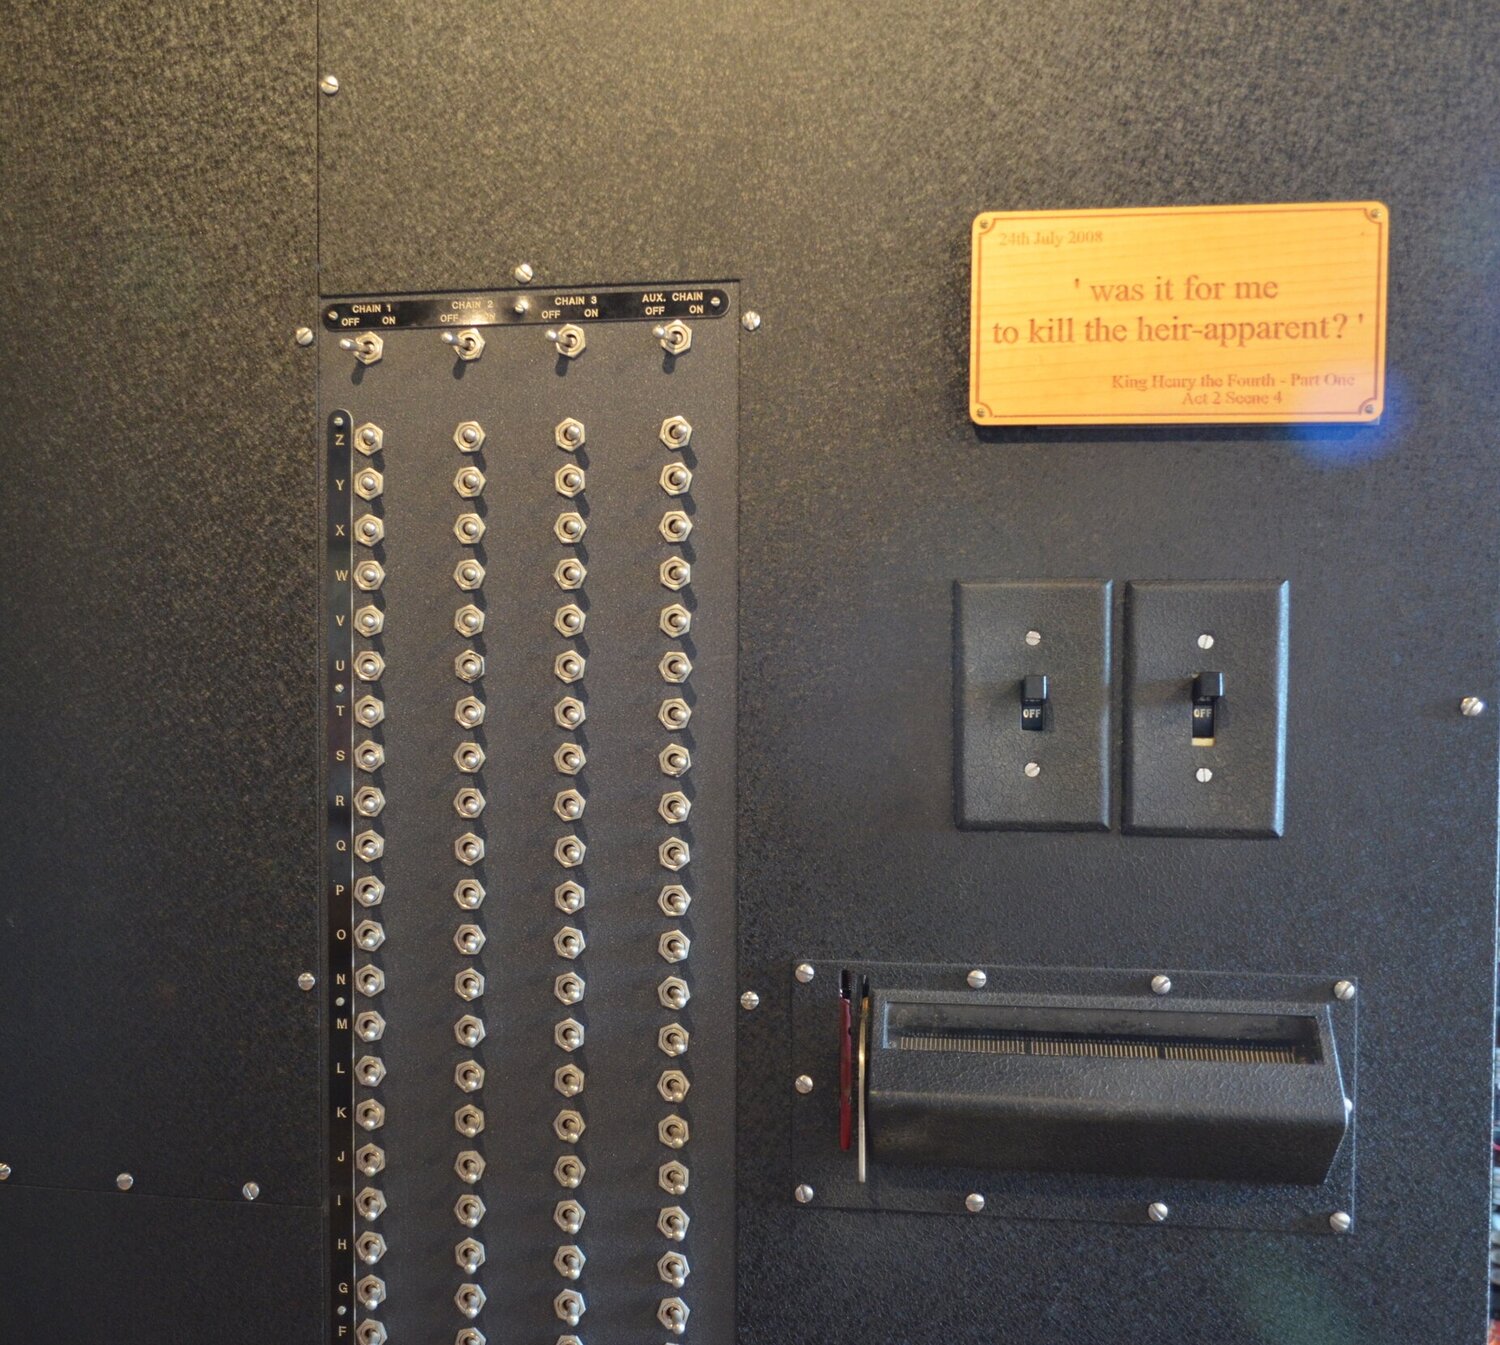 The Turing-Welchman Bombe — The National Museum of Computing